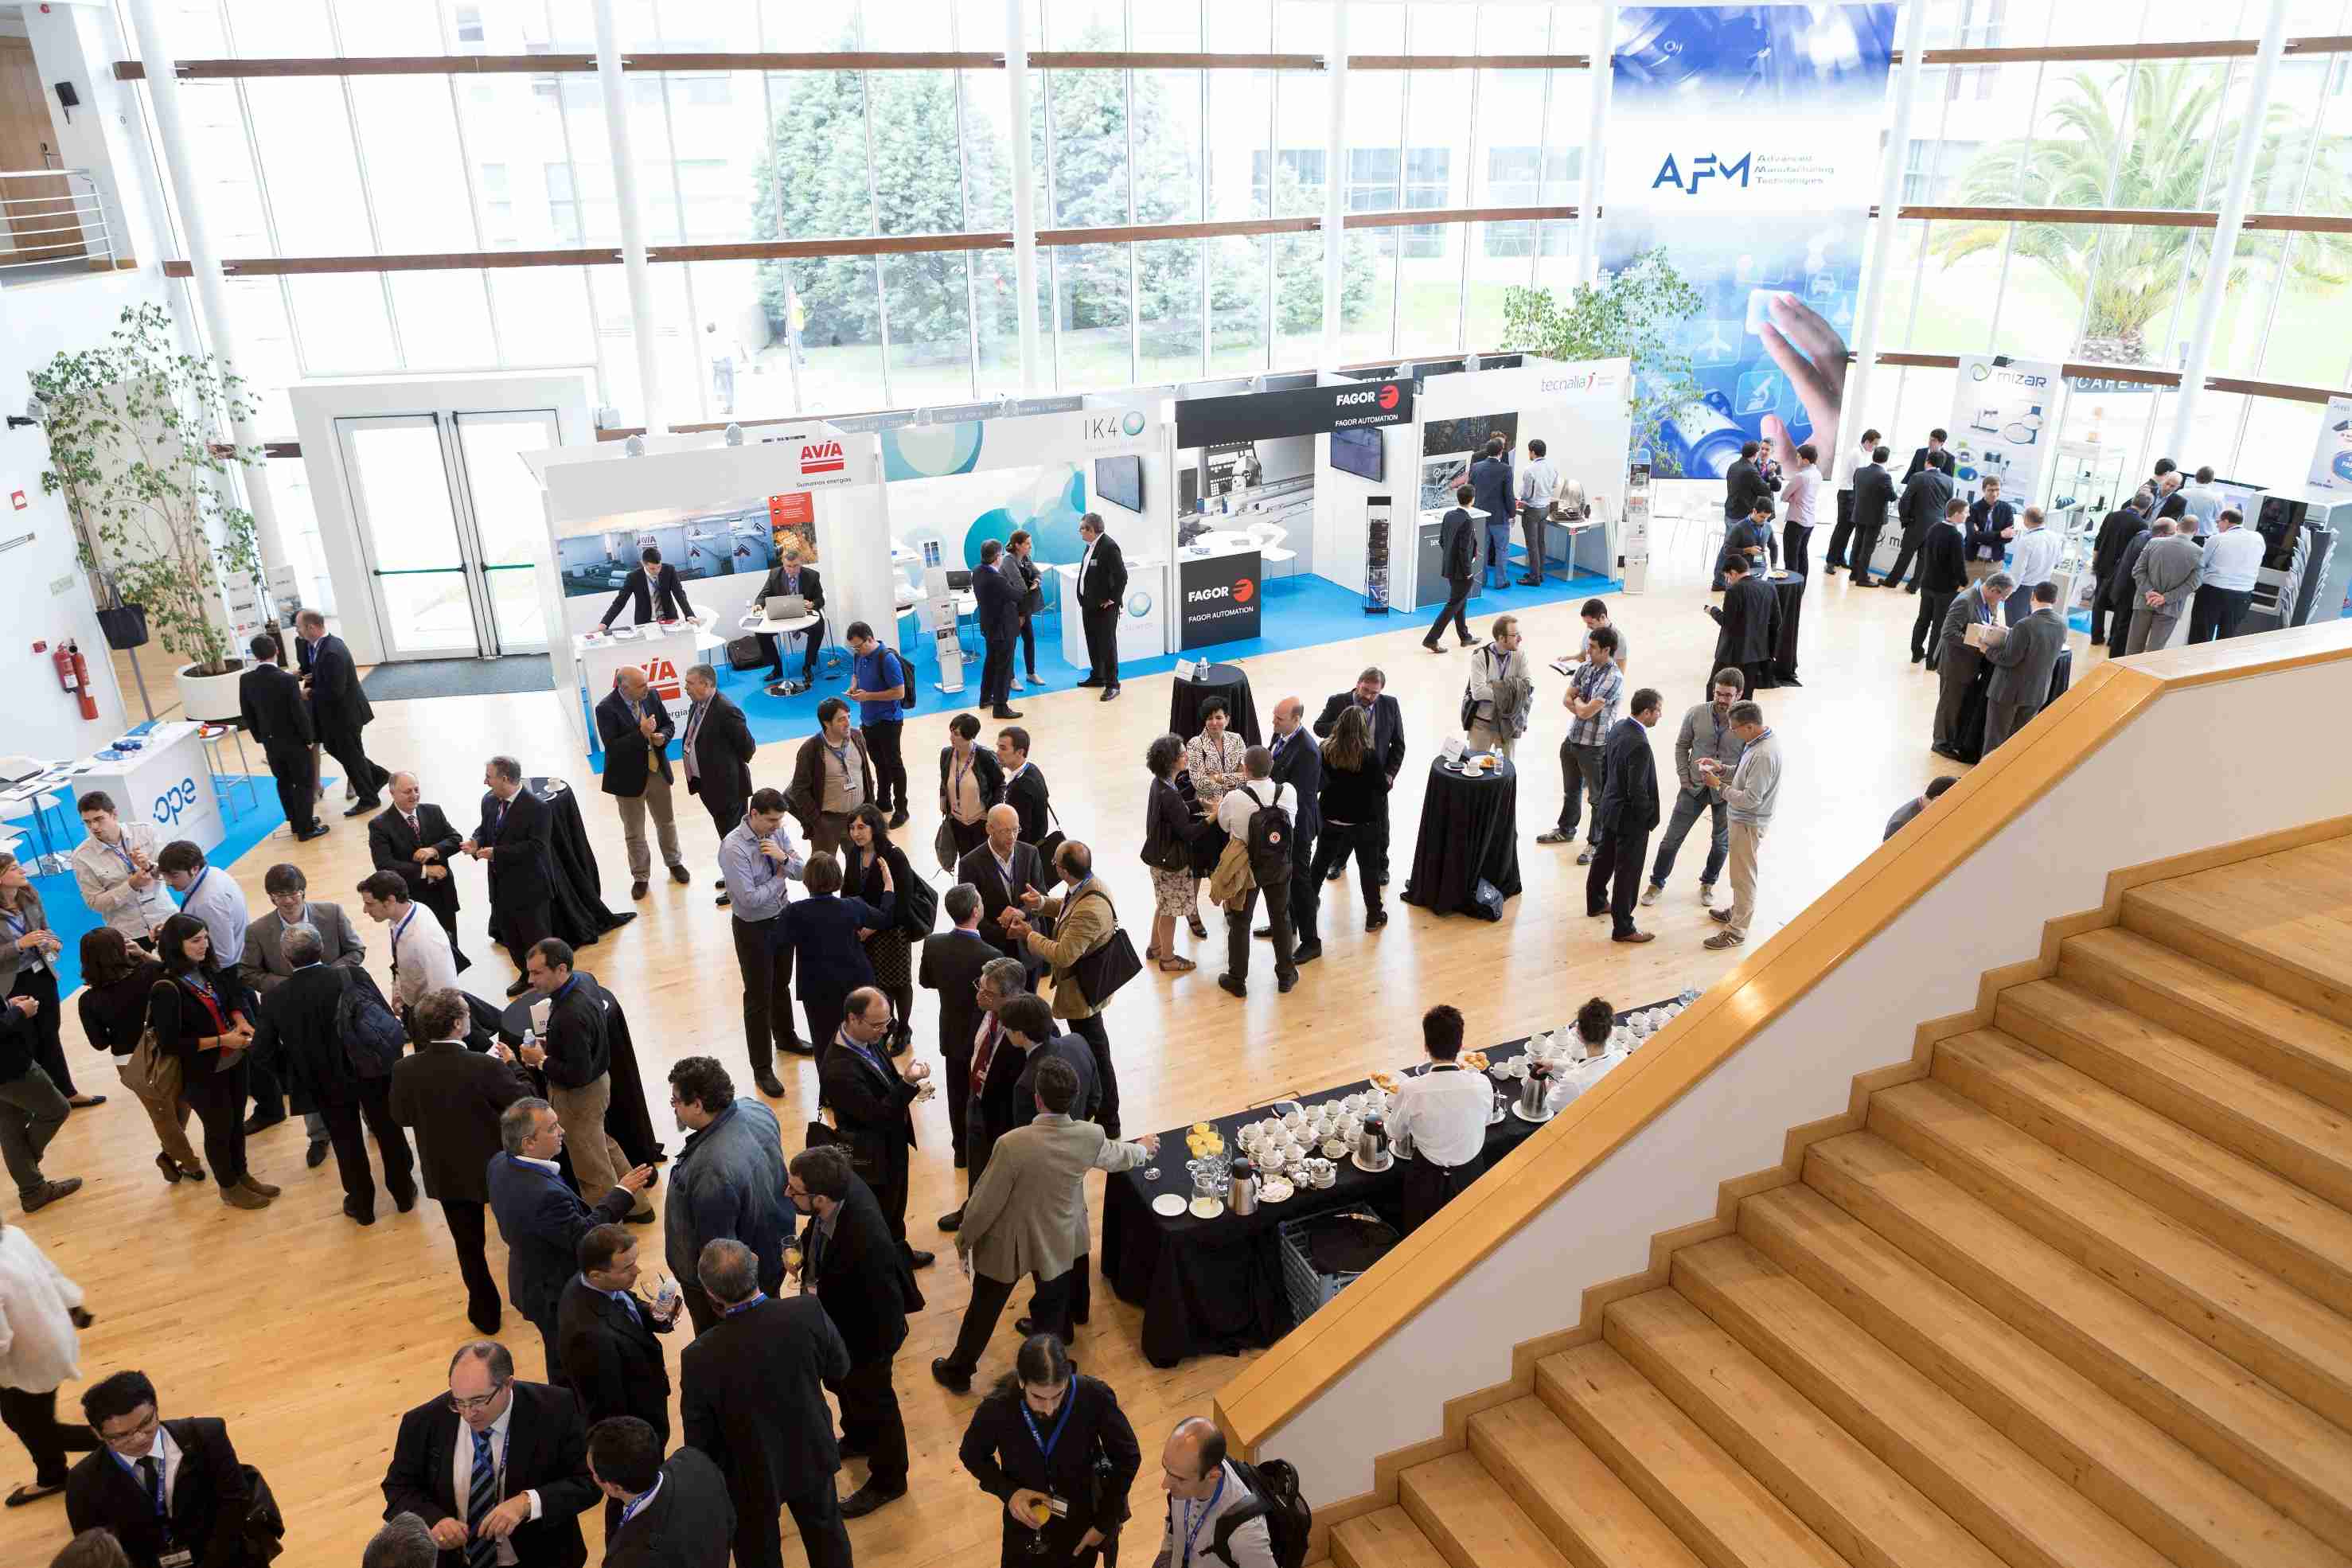 Connected Industry is the star topic at the 21 Congress on Advanced Manufacturing and Machine-Tool